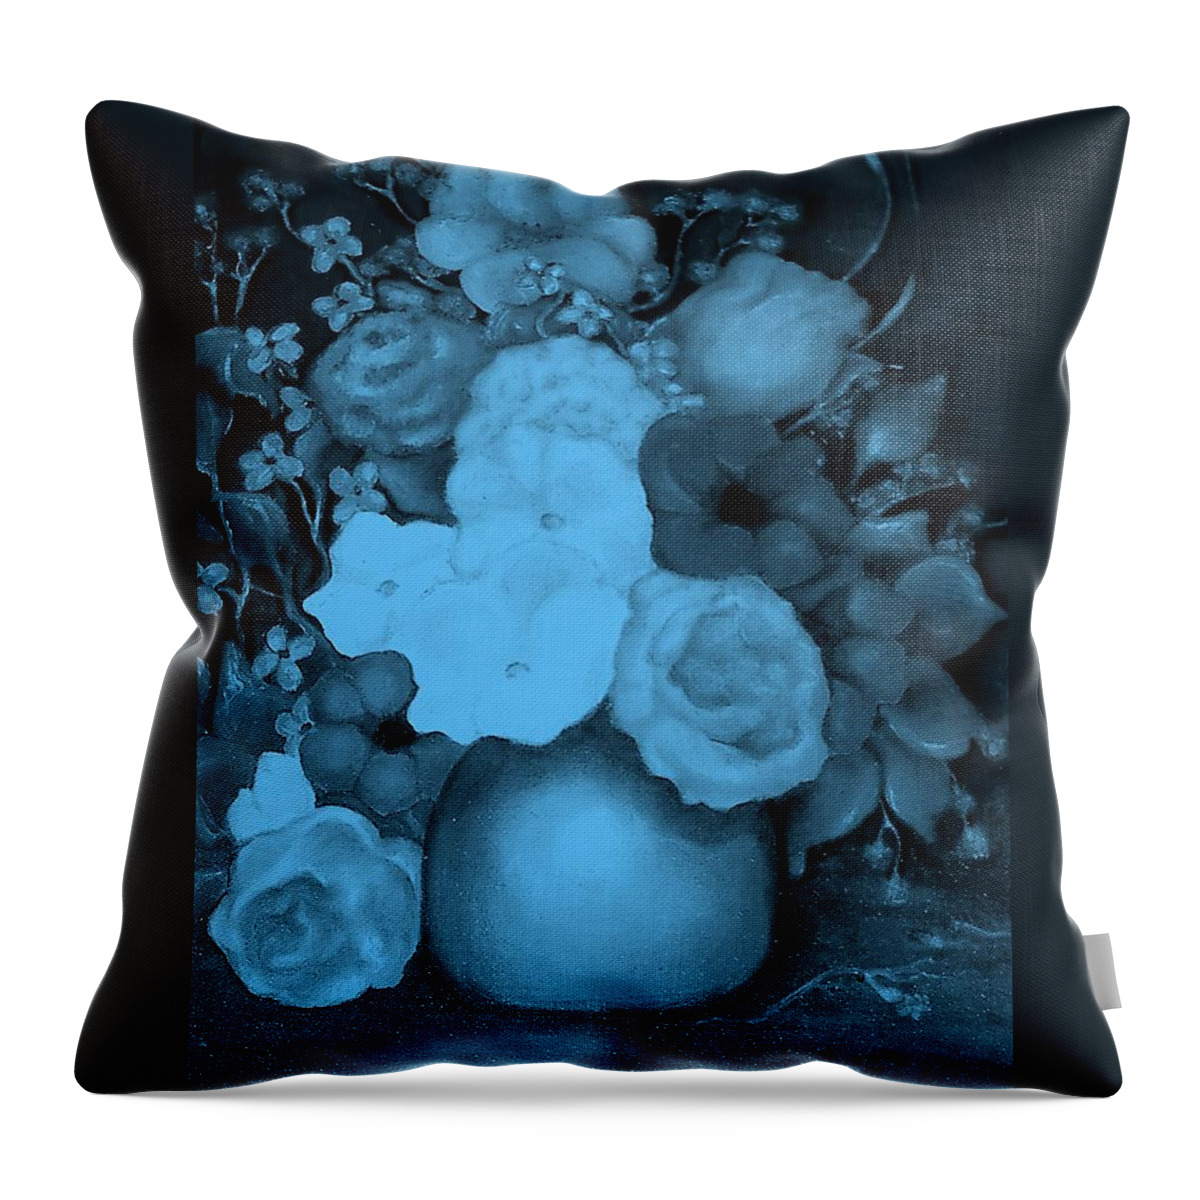 Blue Flowers Throw Pillow featuring the painting Flowers in Blue by Jordana Sands